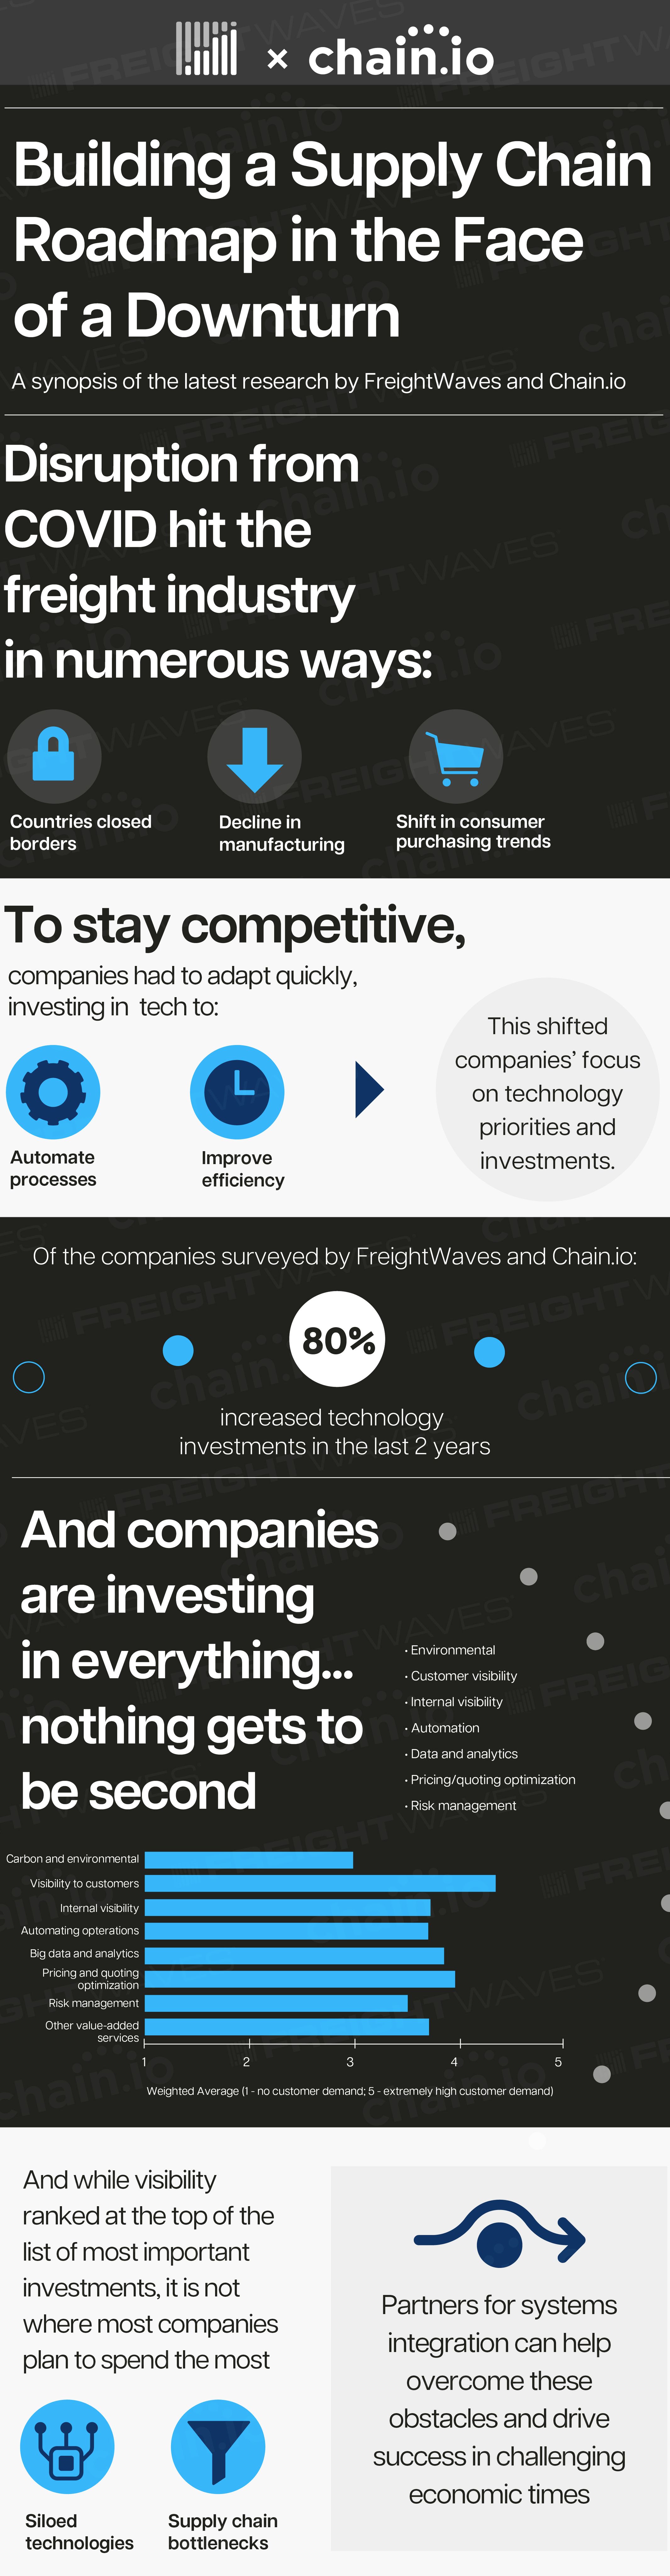 Chain.io and Freightwaves infographic detailing how to build a supply chain roadmap in the face of a downturn and data about freight forwarder's investments. 